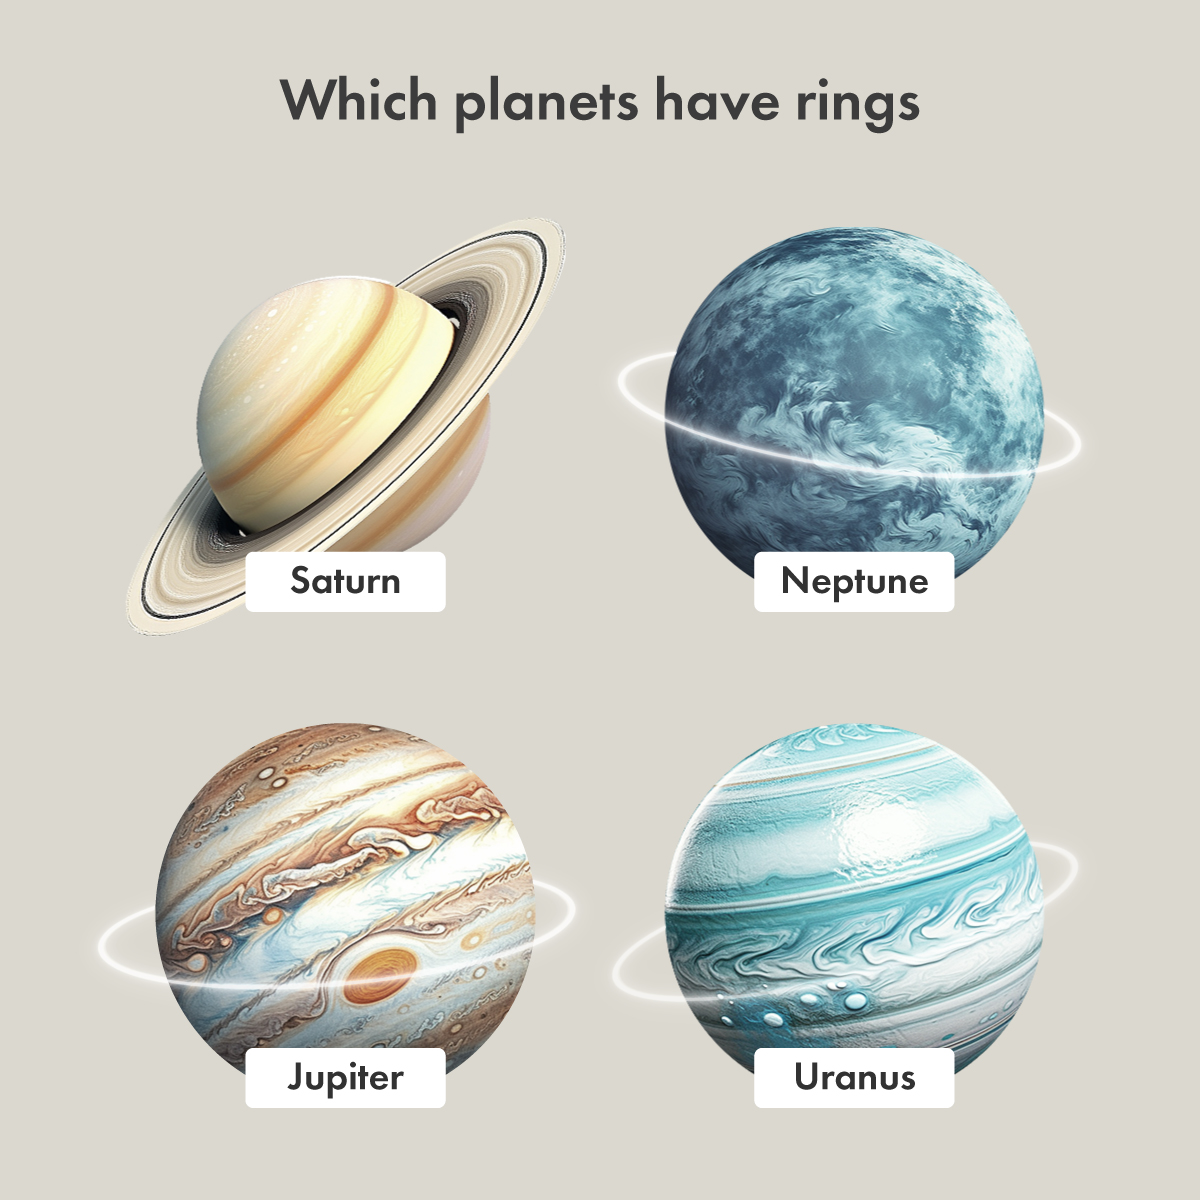 Preserve 200+ planets with rings